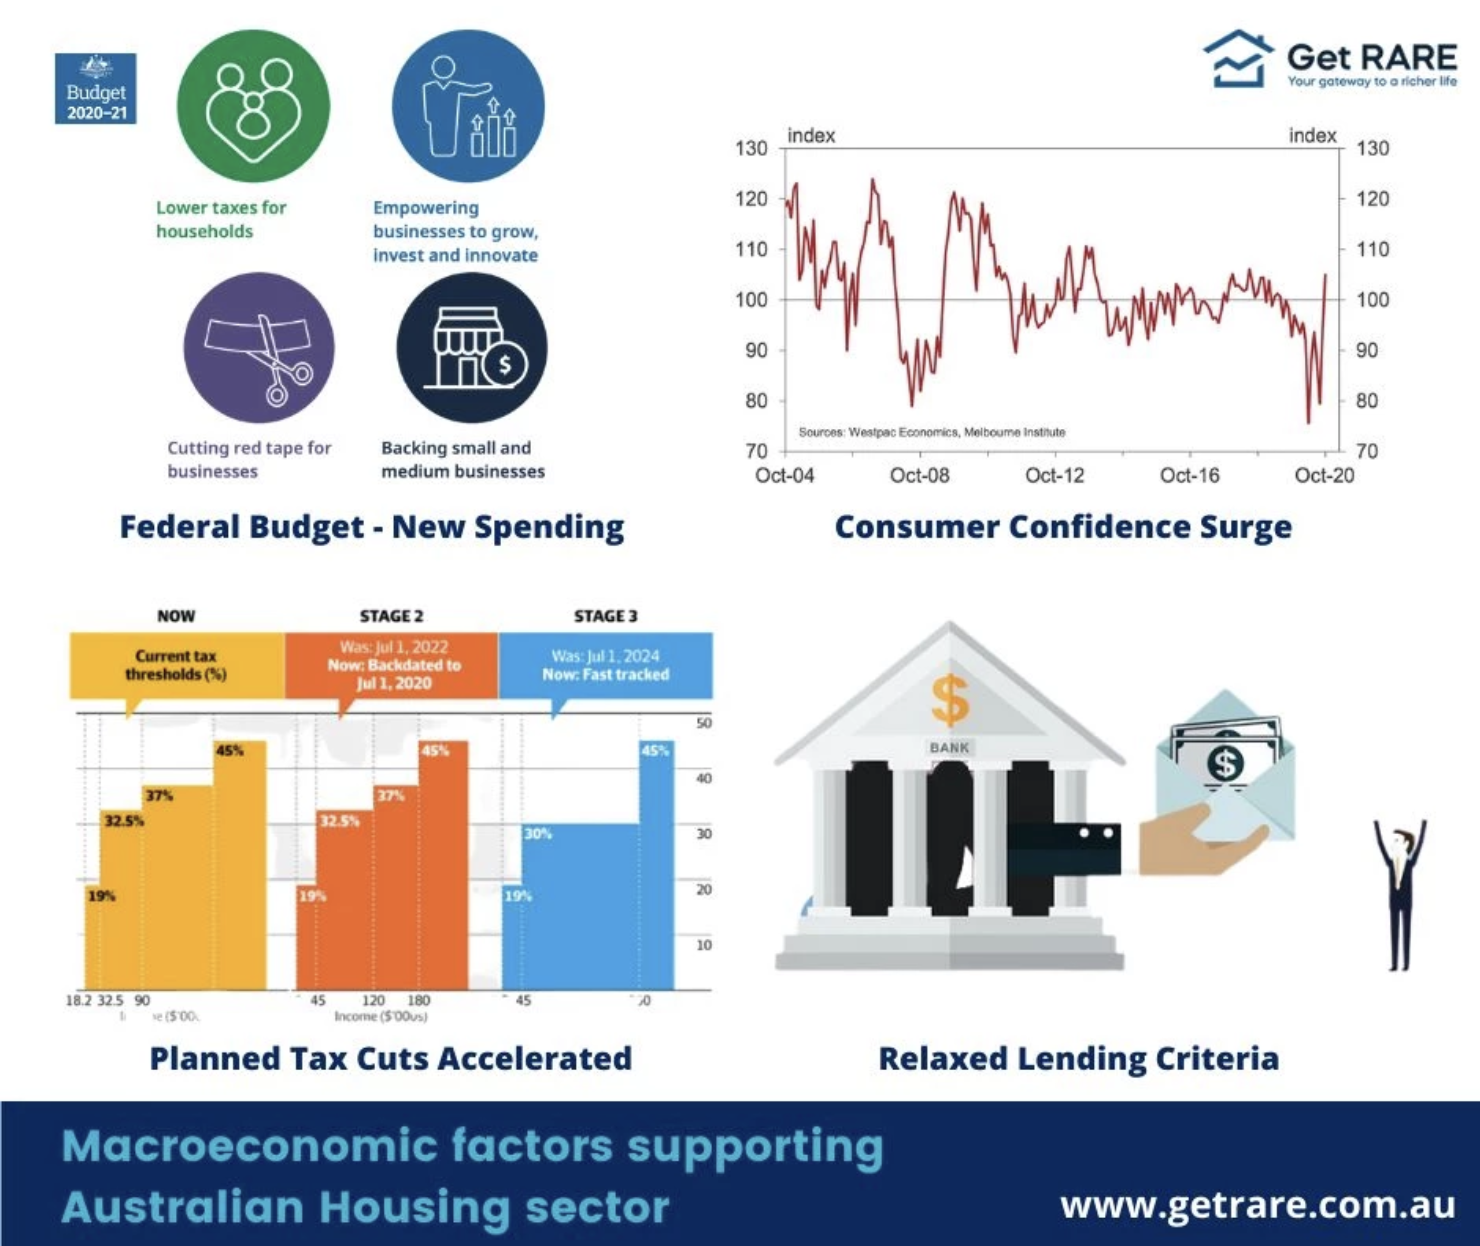 Recent Macroeconomic Factors that are going to support the Australian Housing Sector